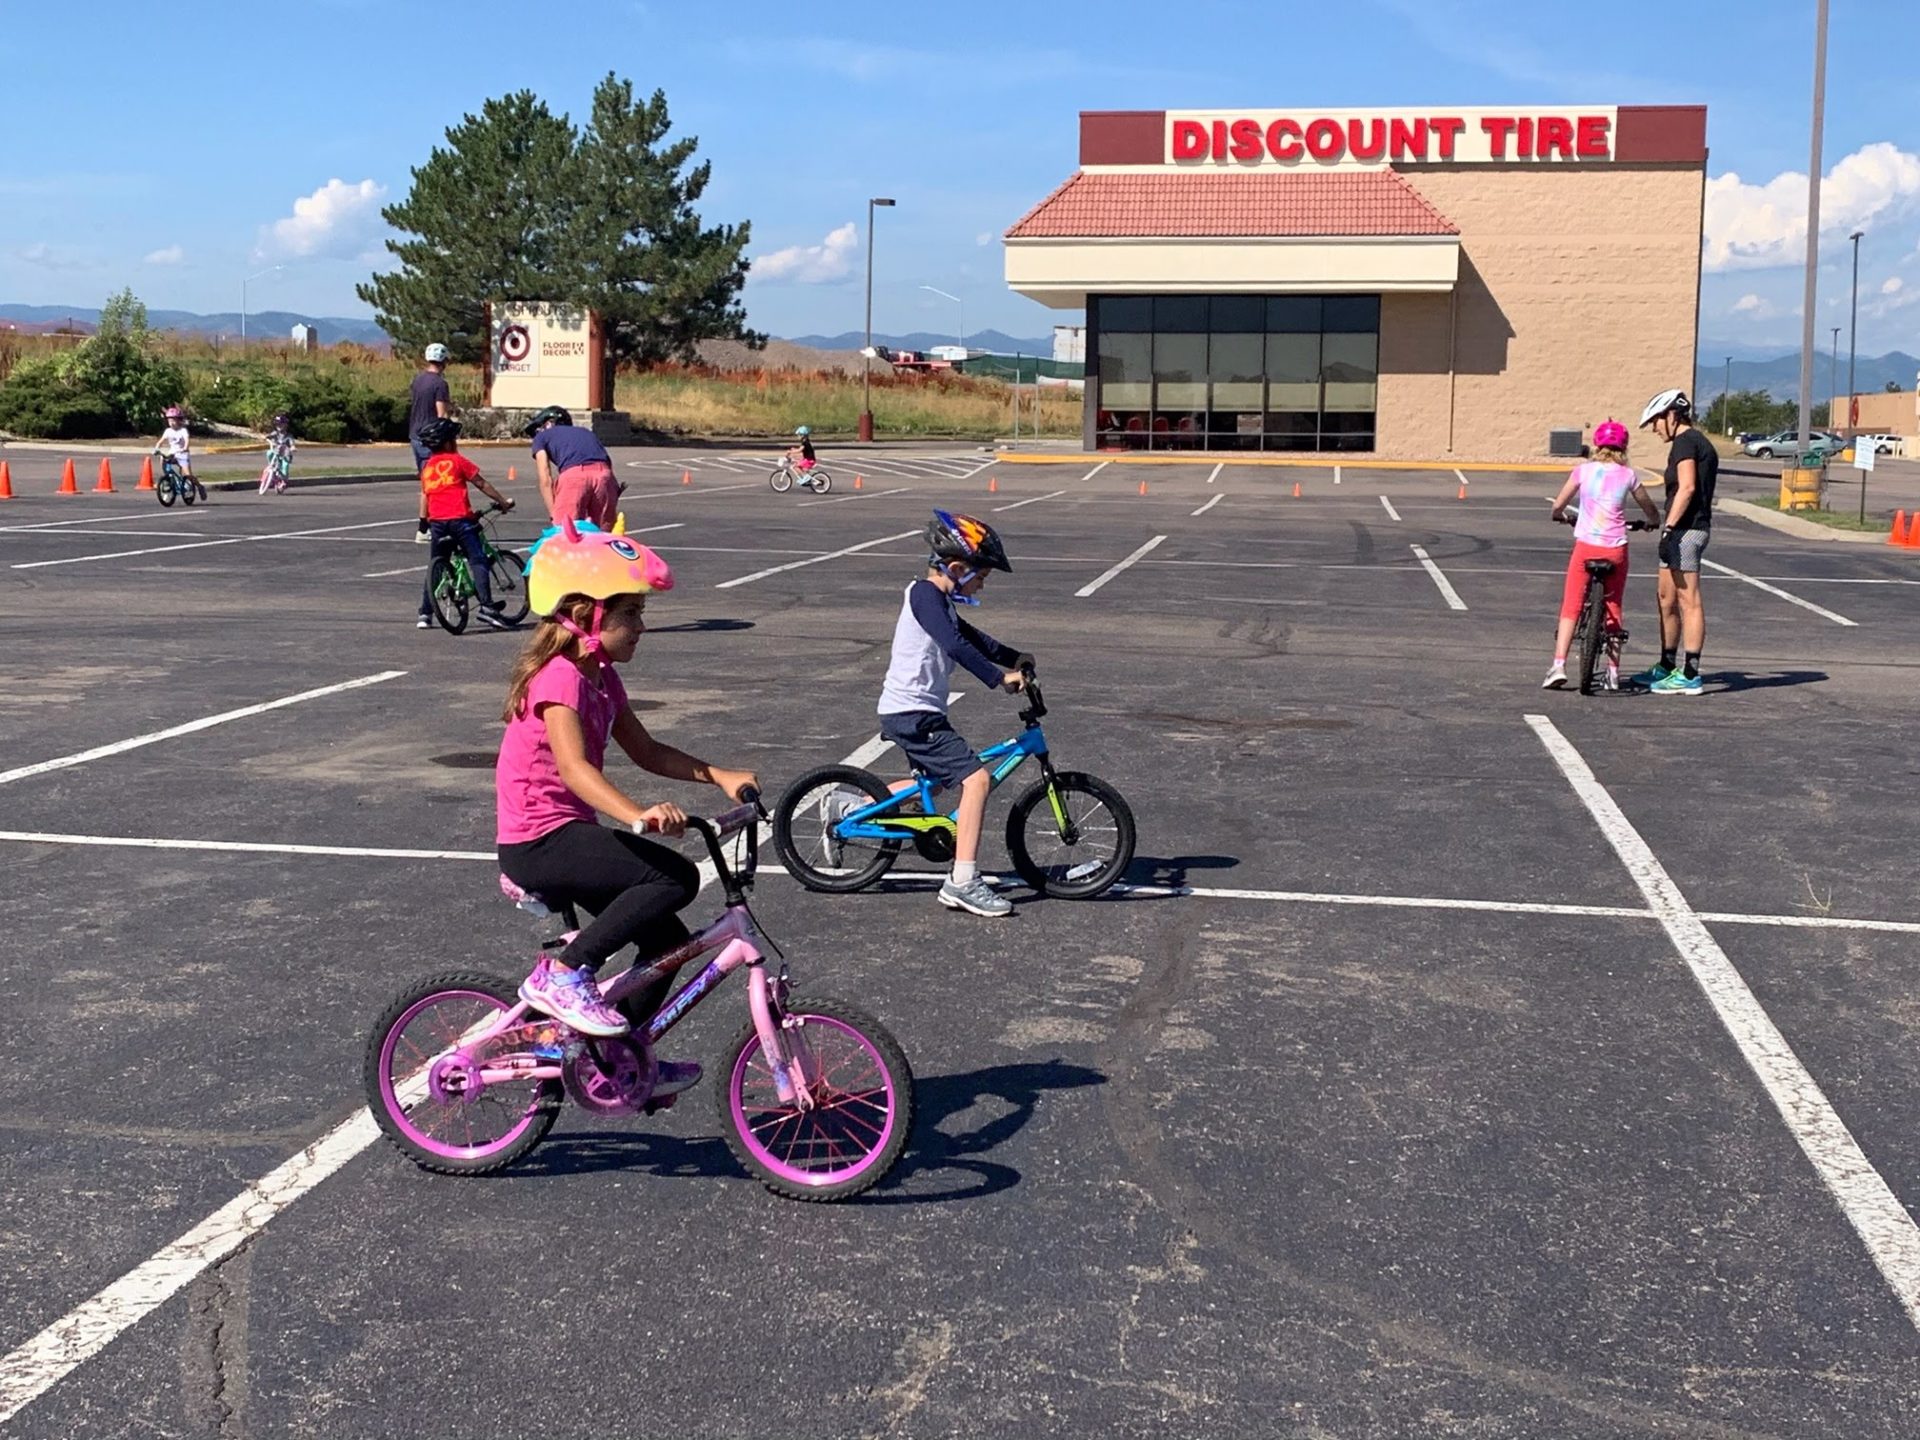 A number of children learning to ride bikes, with adults nearby instructing them, in a parking lot.